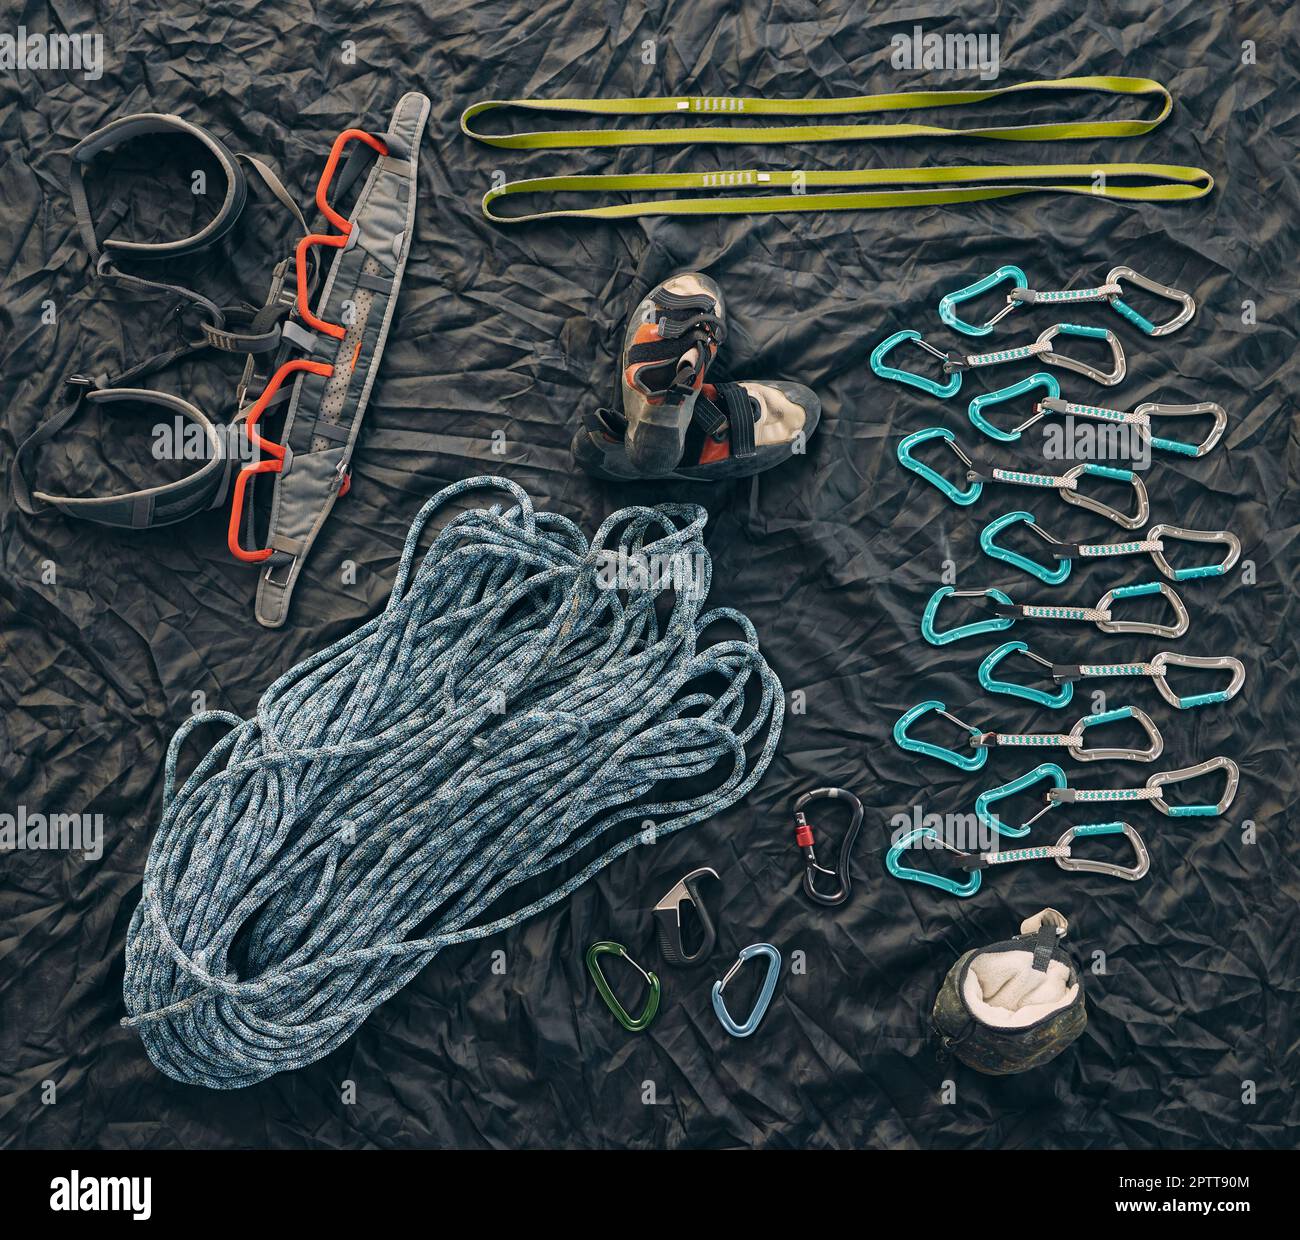 Closeup shot of a variety of carabiner hooks, rope, and other safety  equipment used for rock or mountain climbing against a dark background.  Needed fo Stock Photo - Alamy